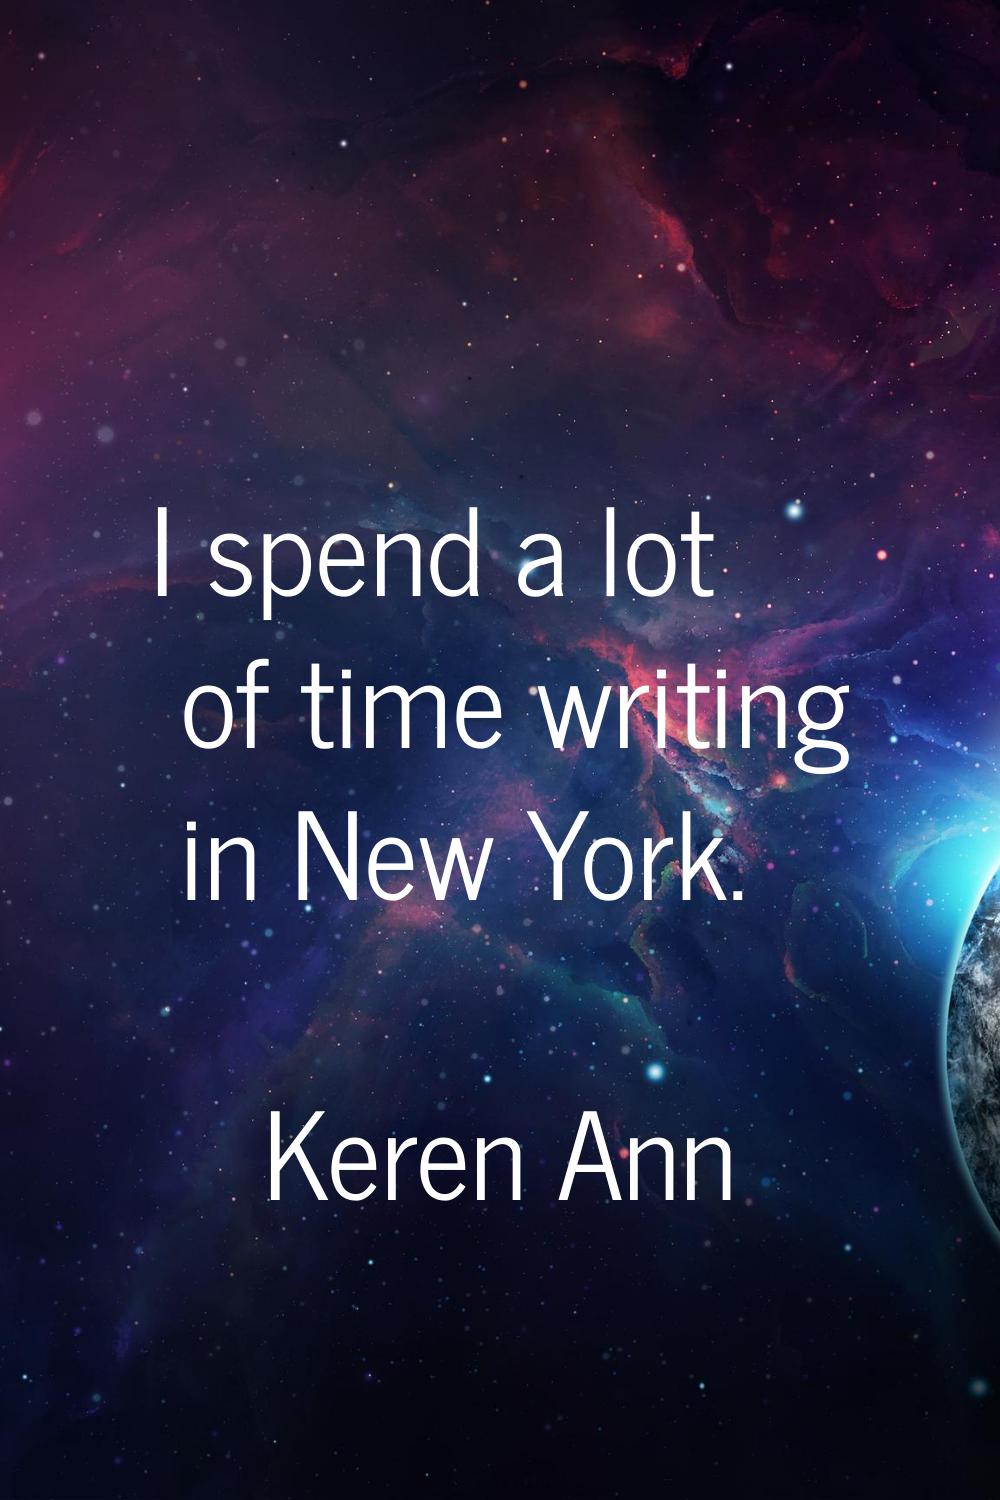 I spend a lot of time writing in New York.